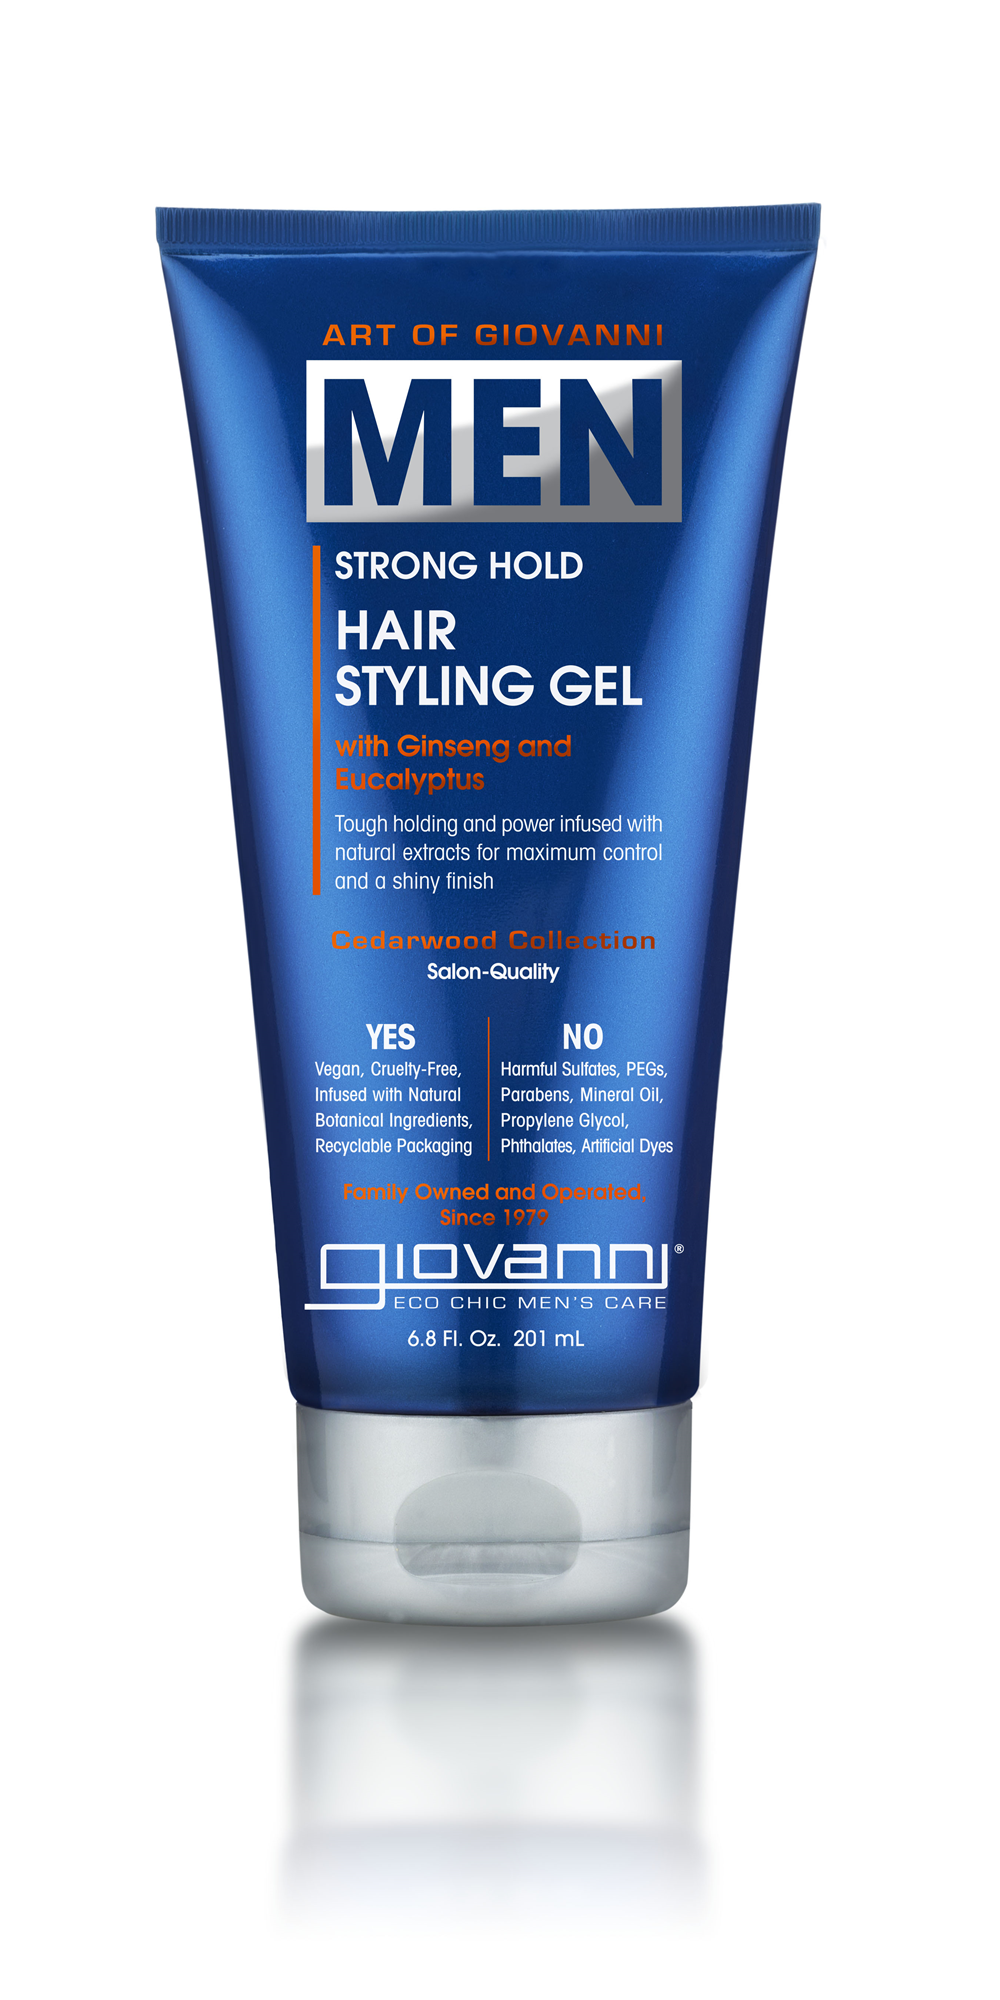 GIOVANNI MEN Hair Styling Gel . Curated Wellness